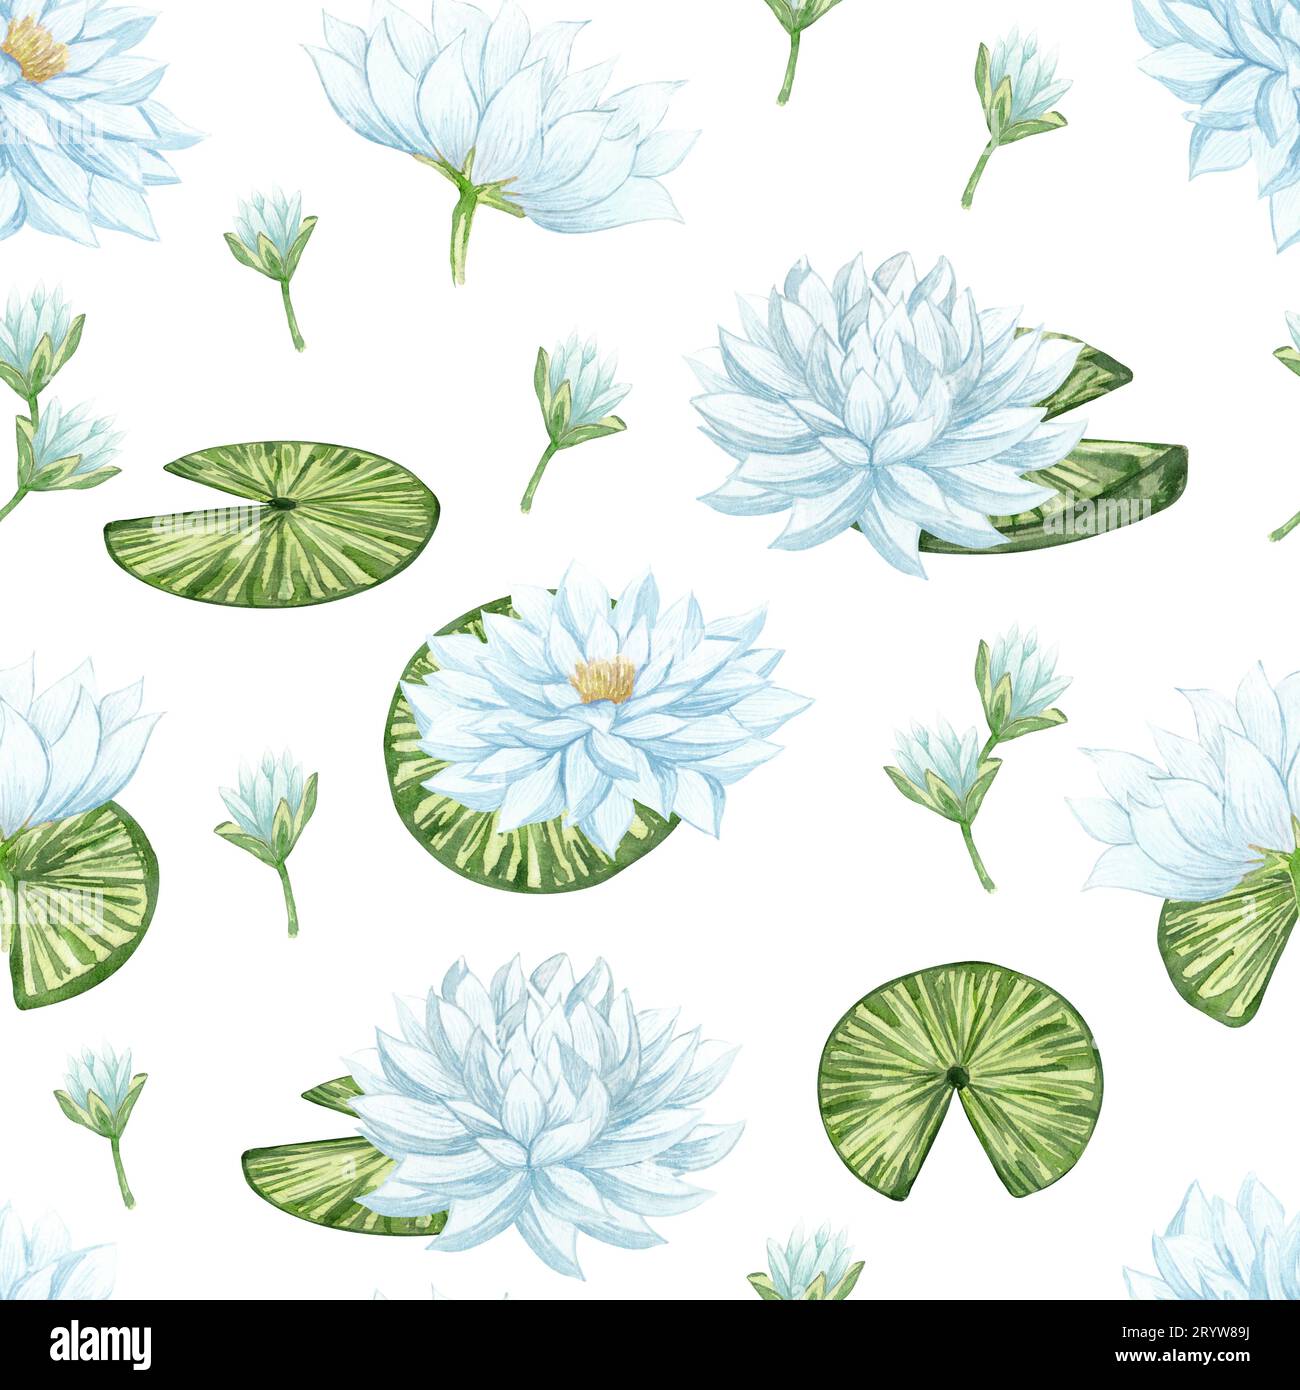 Watercolor seamless pattern with beautiful lotus flower. Hand drawn white water lilies and leaves floral background. Stock Photo